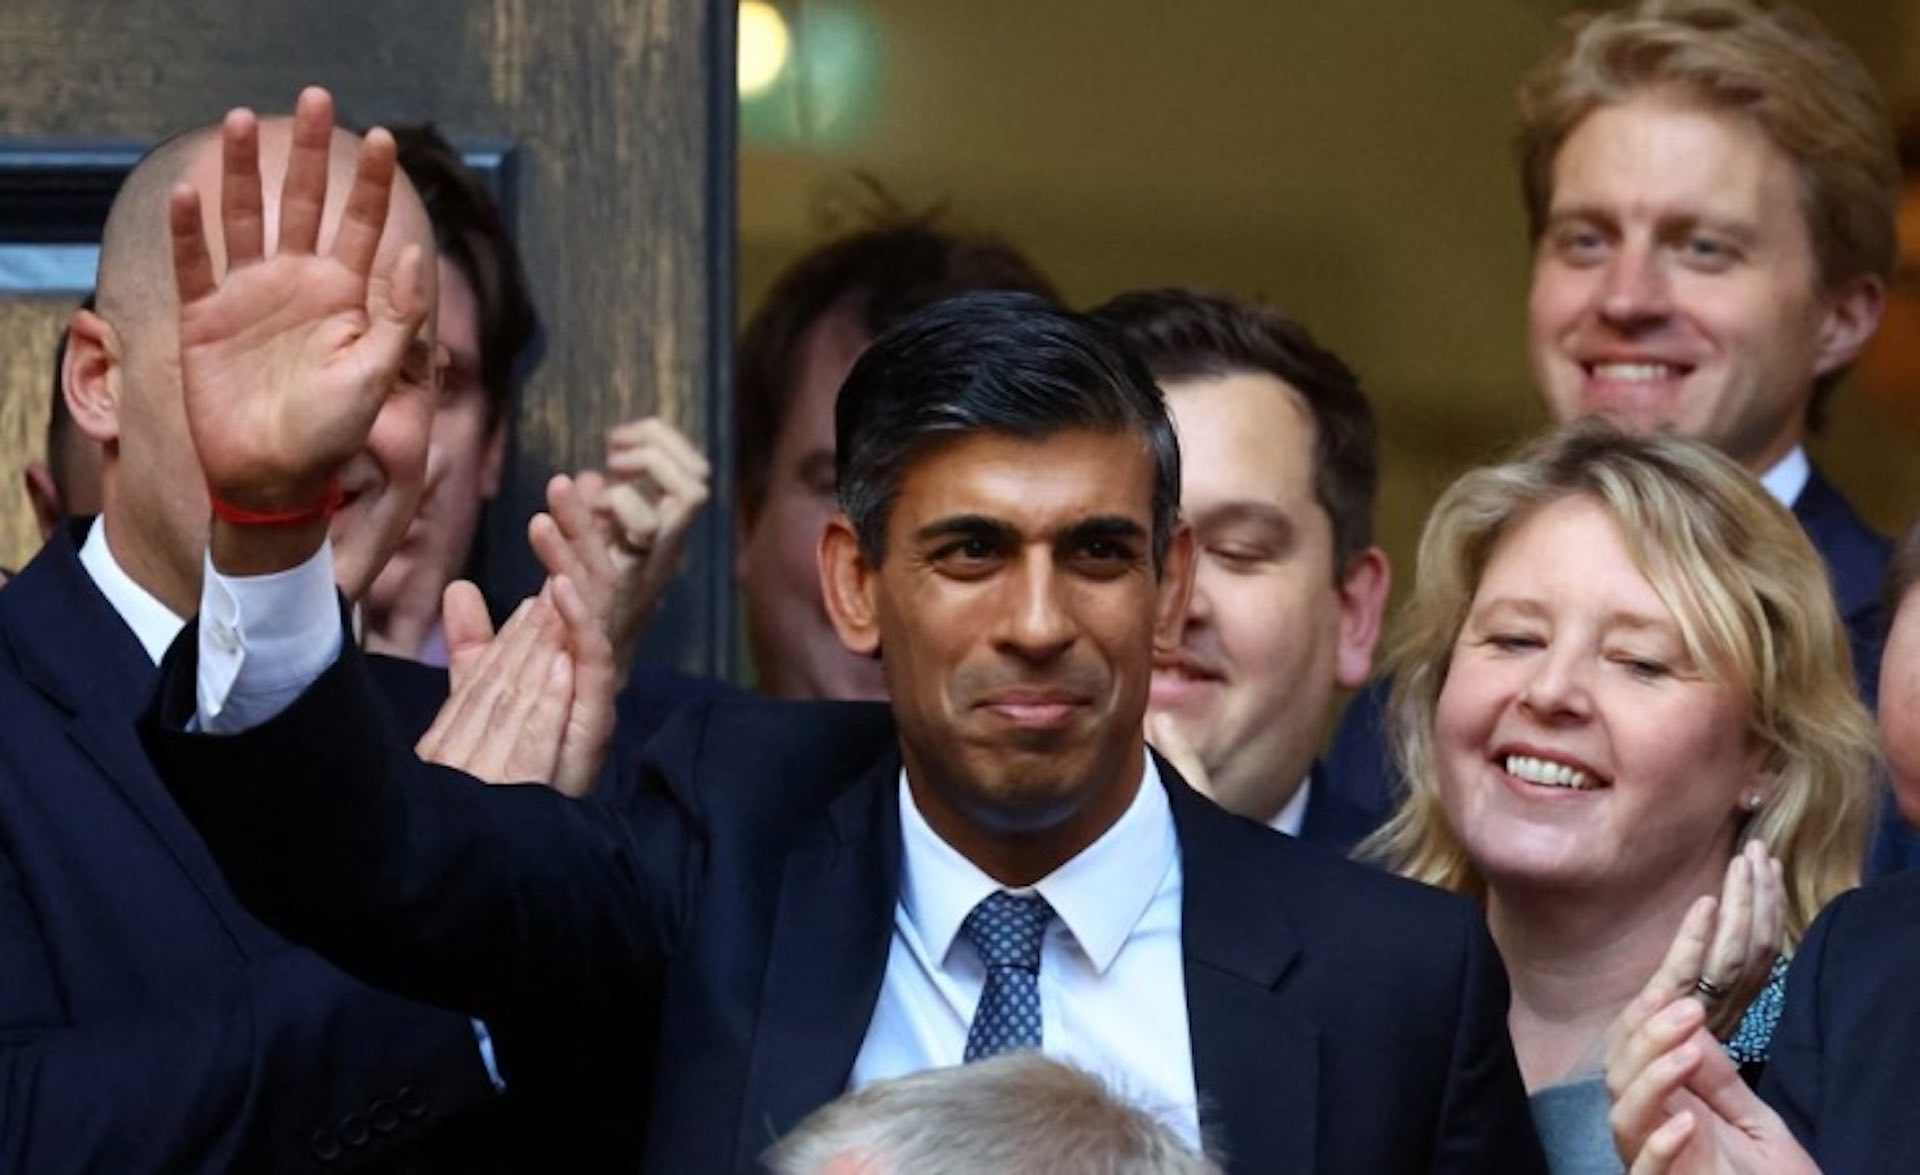 In his newly-assumed role as UK PM, Rishi Sunak faces a huge task